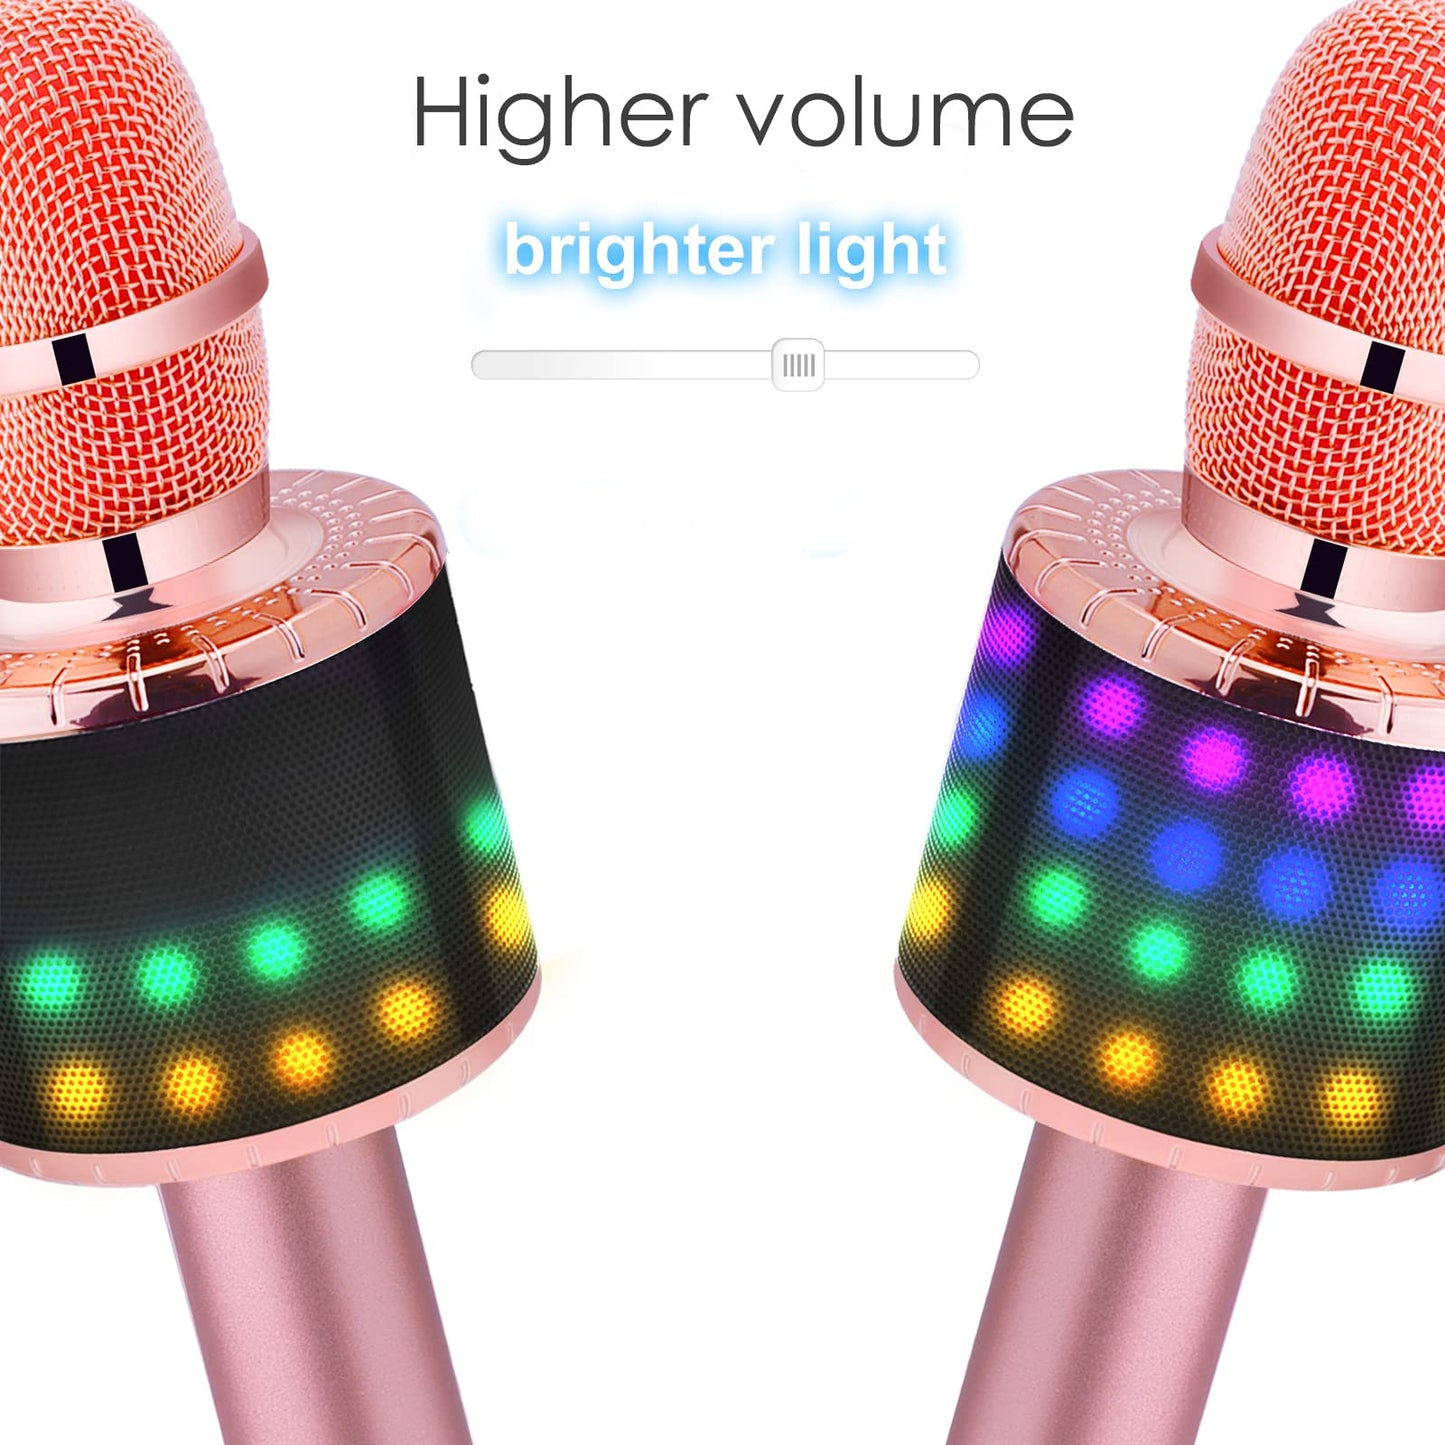 BONAOK Wireless Bluetooth Karaoke Microphone with Controllable LED Lights, Portable Handheld Karaoke Speaker Machine Birthday Home Party for All Smartphone (Q78 Rose Gold Plus)